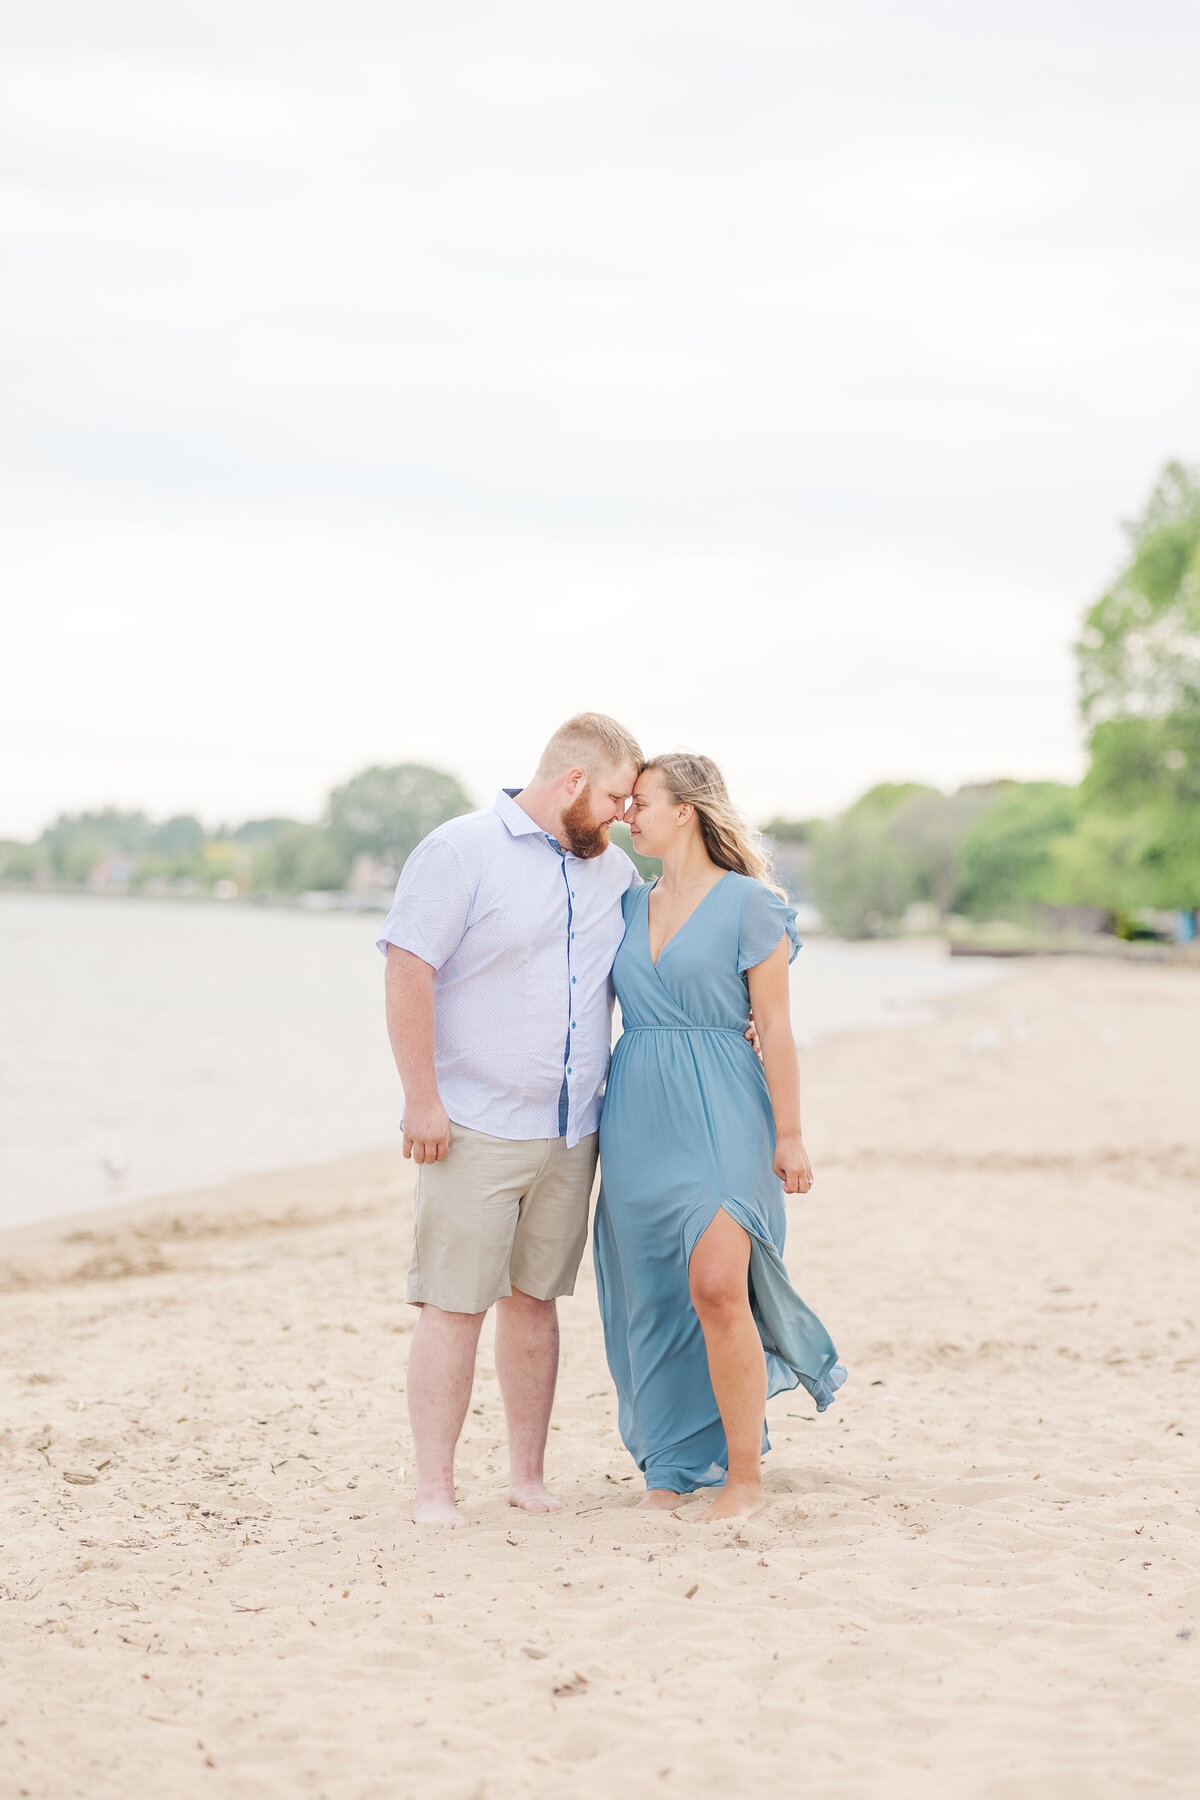 A newly engaged couple walks up a beach snuggling on a windy day at sunset in a blue dress and button down shirt